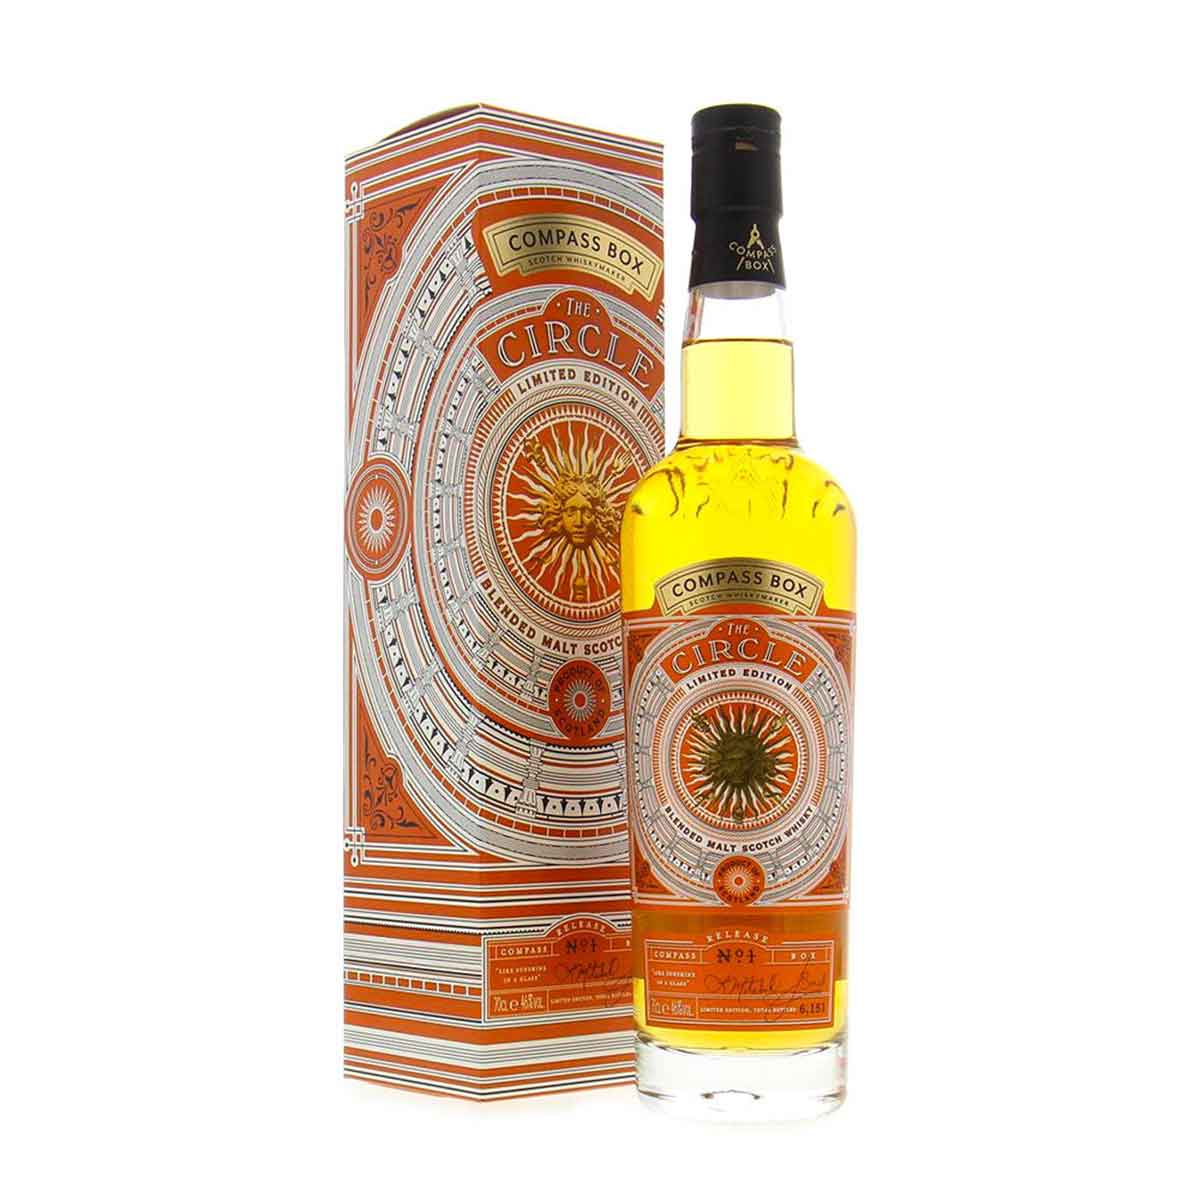 TAG Liquor Stores BC-COMPASS BOX "THE CIRCLE" LIMITED SCOTCH WHISKY 750ML